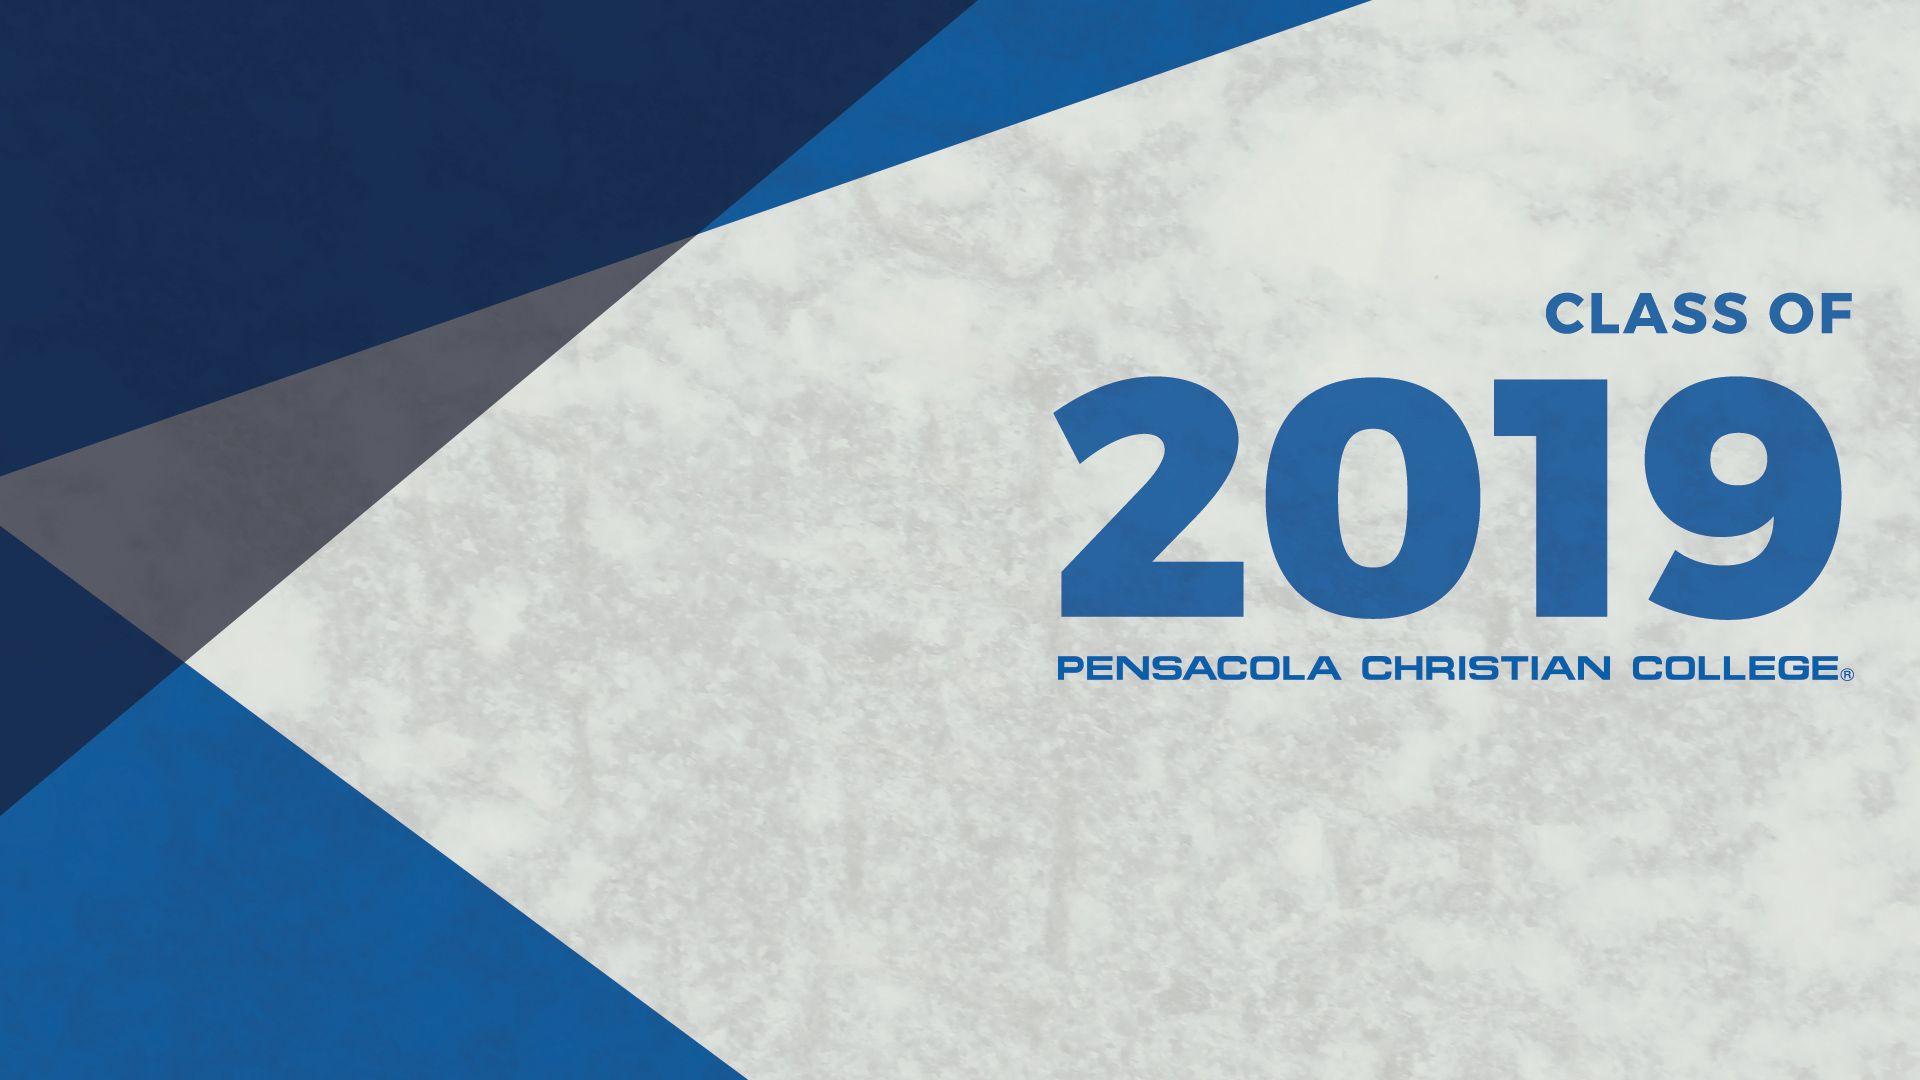 Wallpapers - Pensacola Christian College.